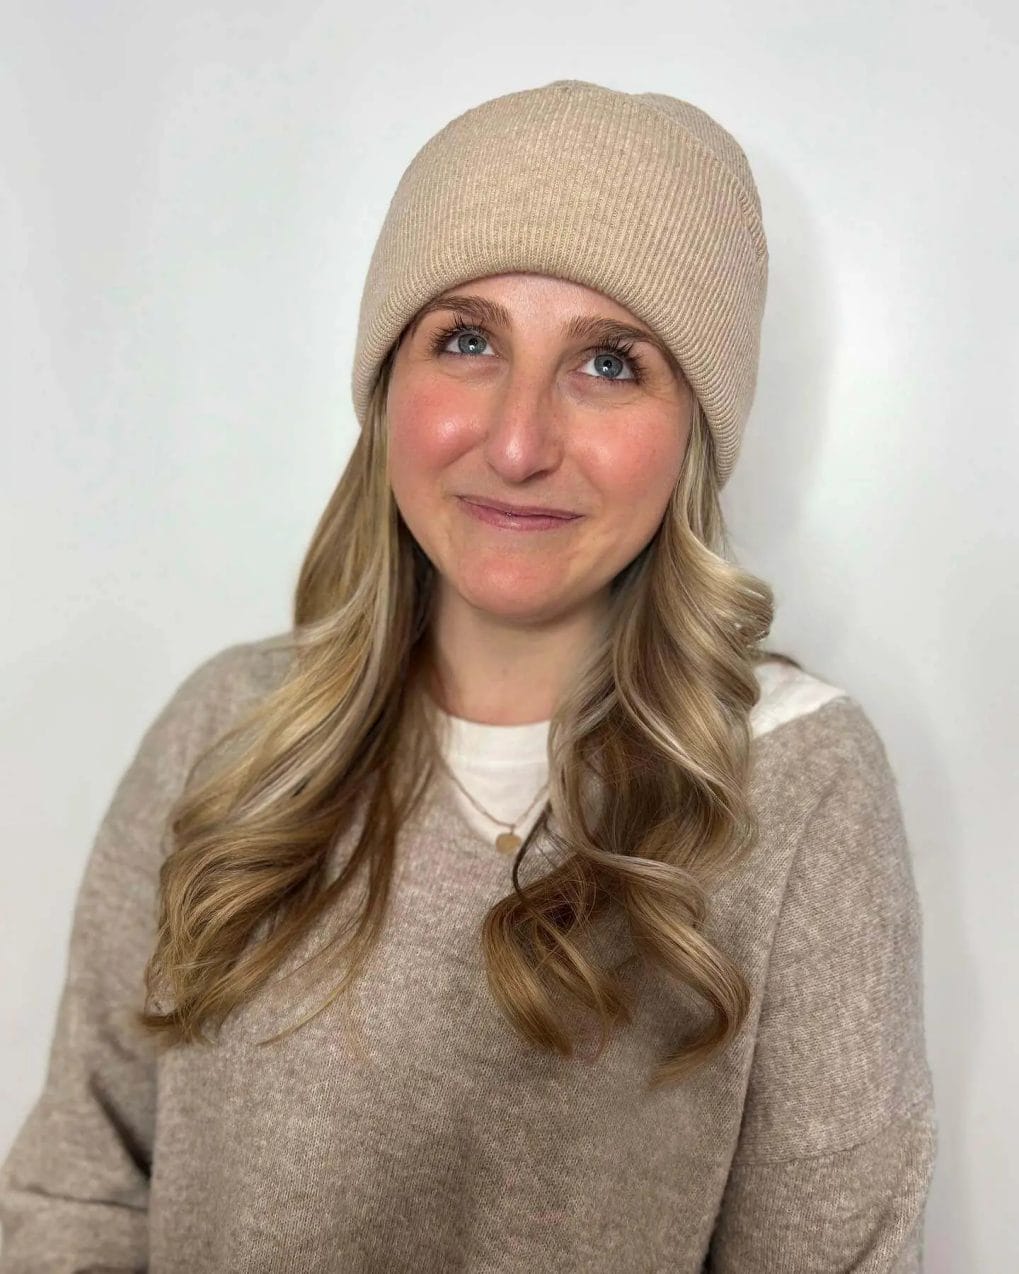 Soft bouncy curls with blonde highlights under a neutral-toned beanie.